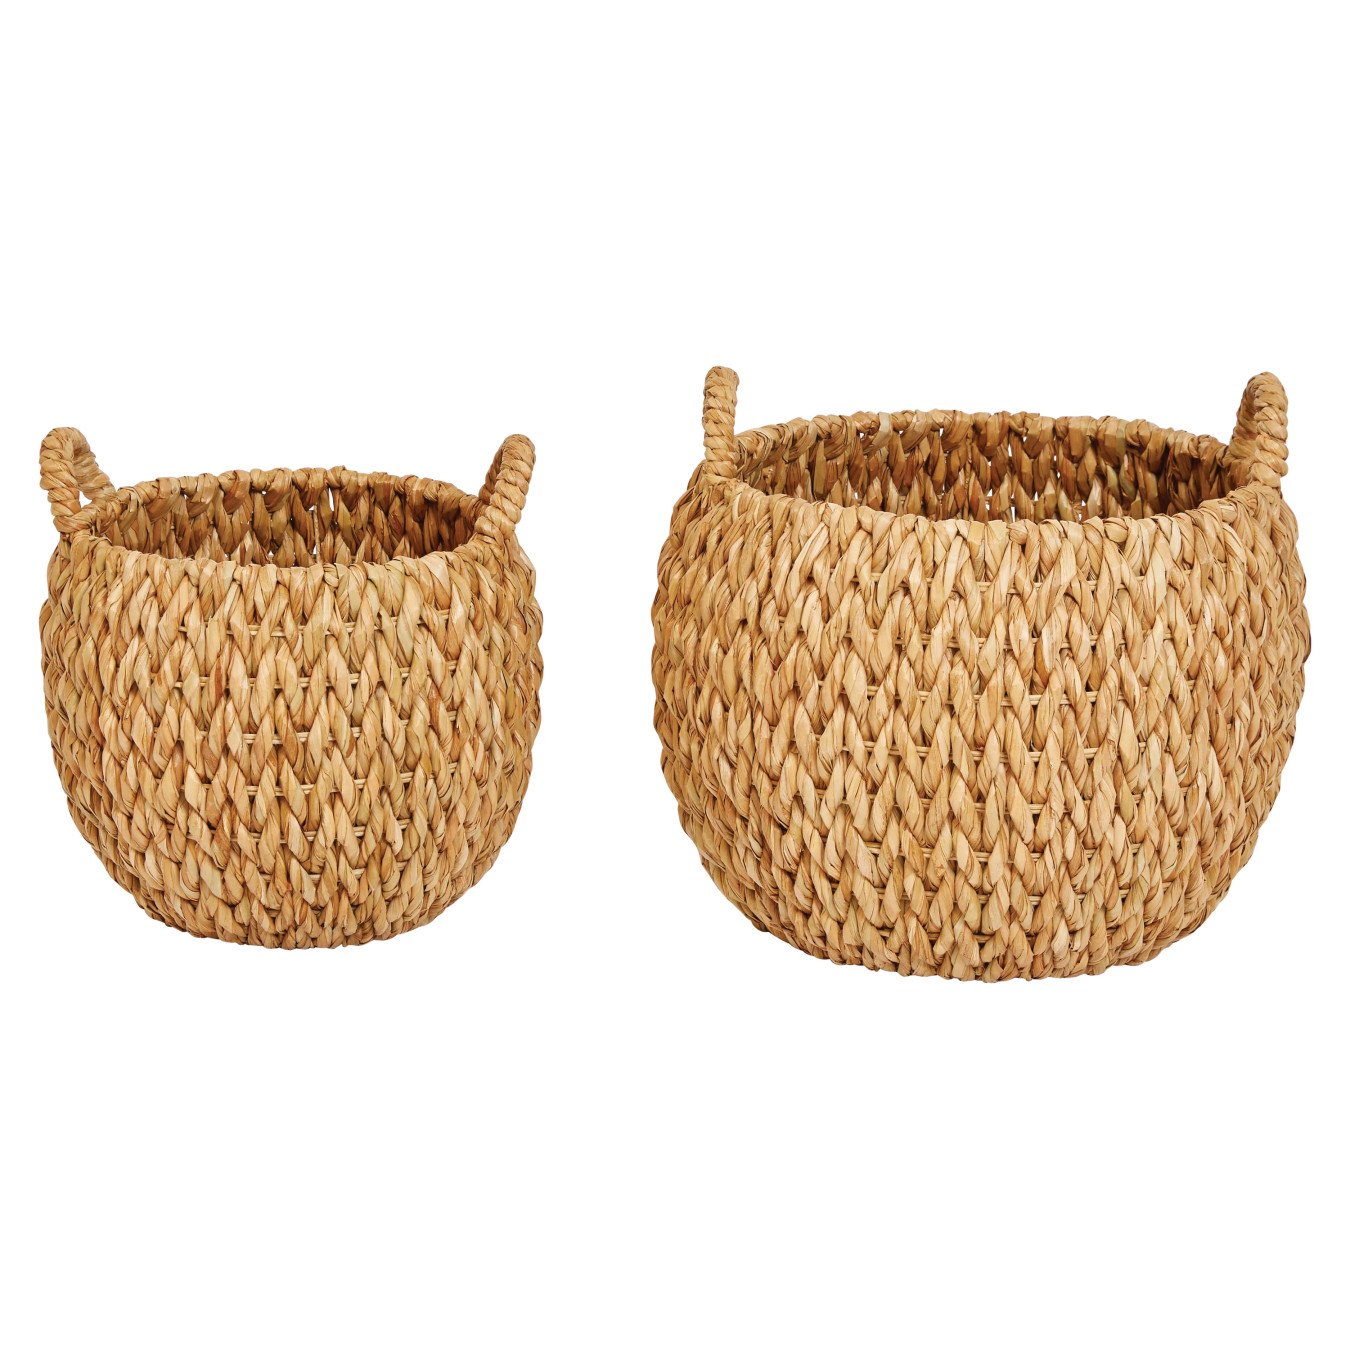 16" & 20.5" Round Woven Water Hyacinth Baskets with Handles (Set of 2 Sizes)